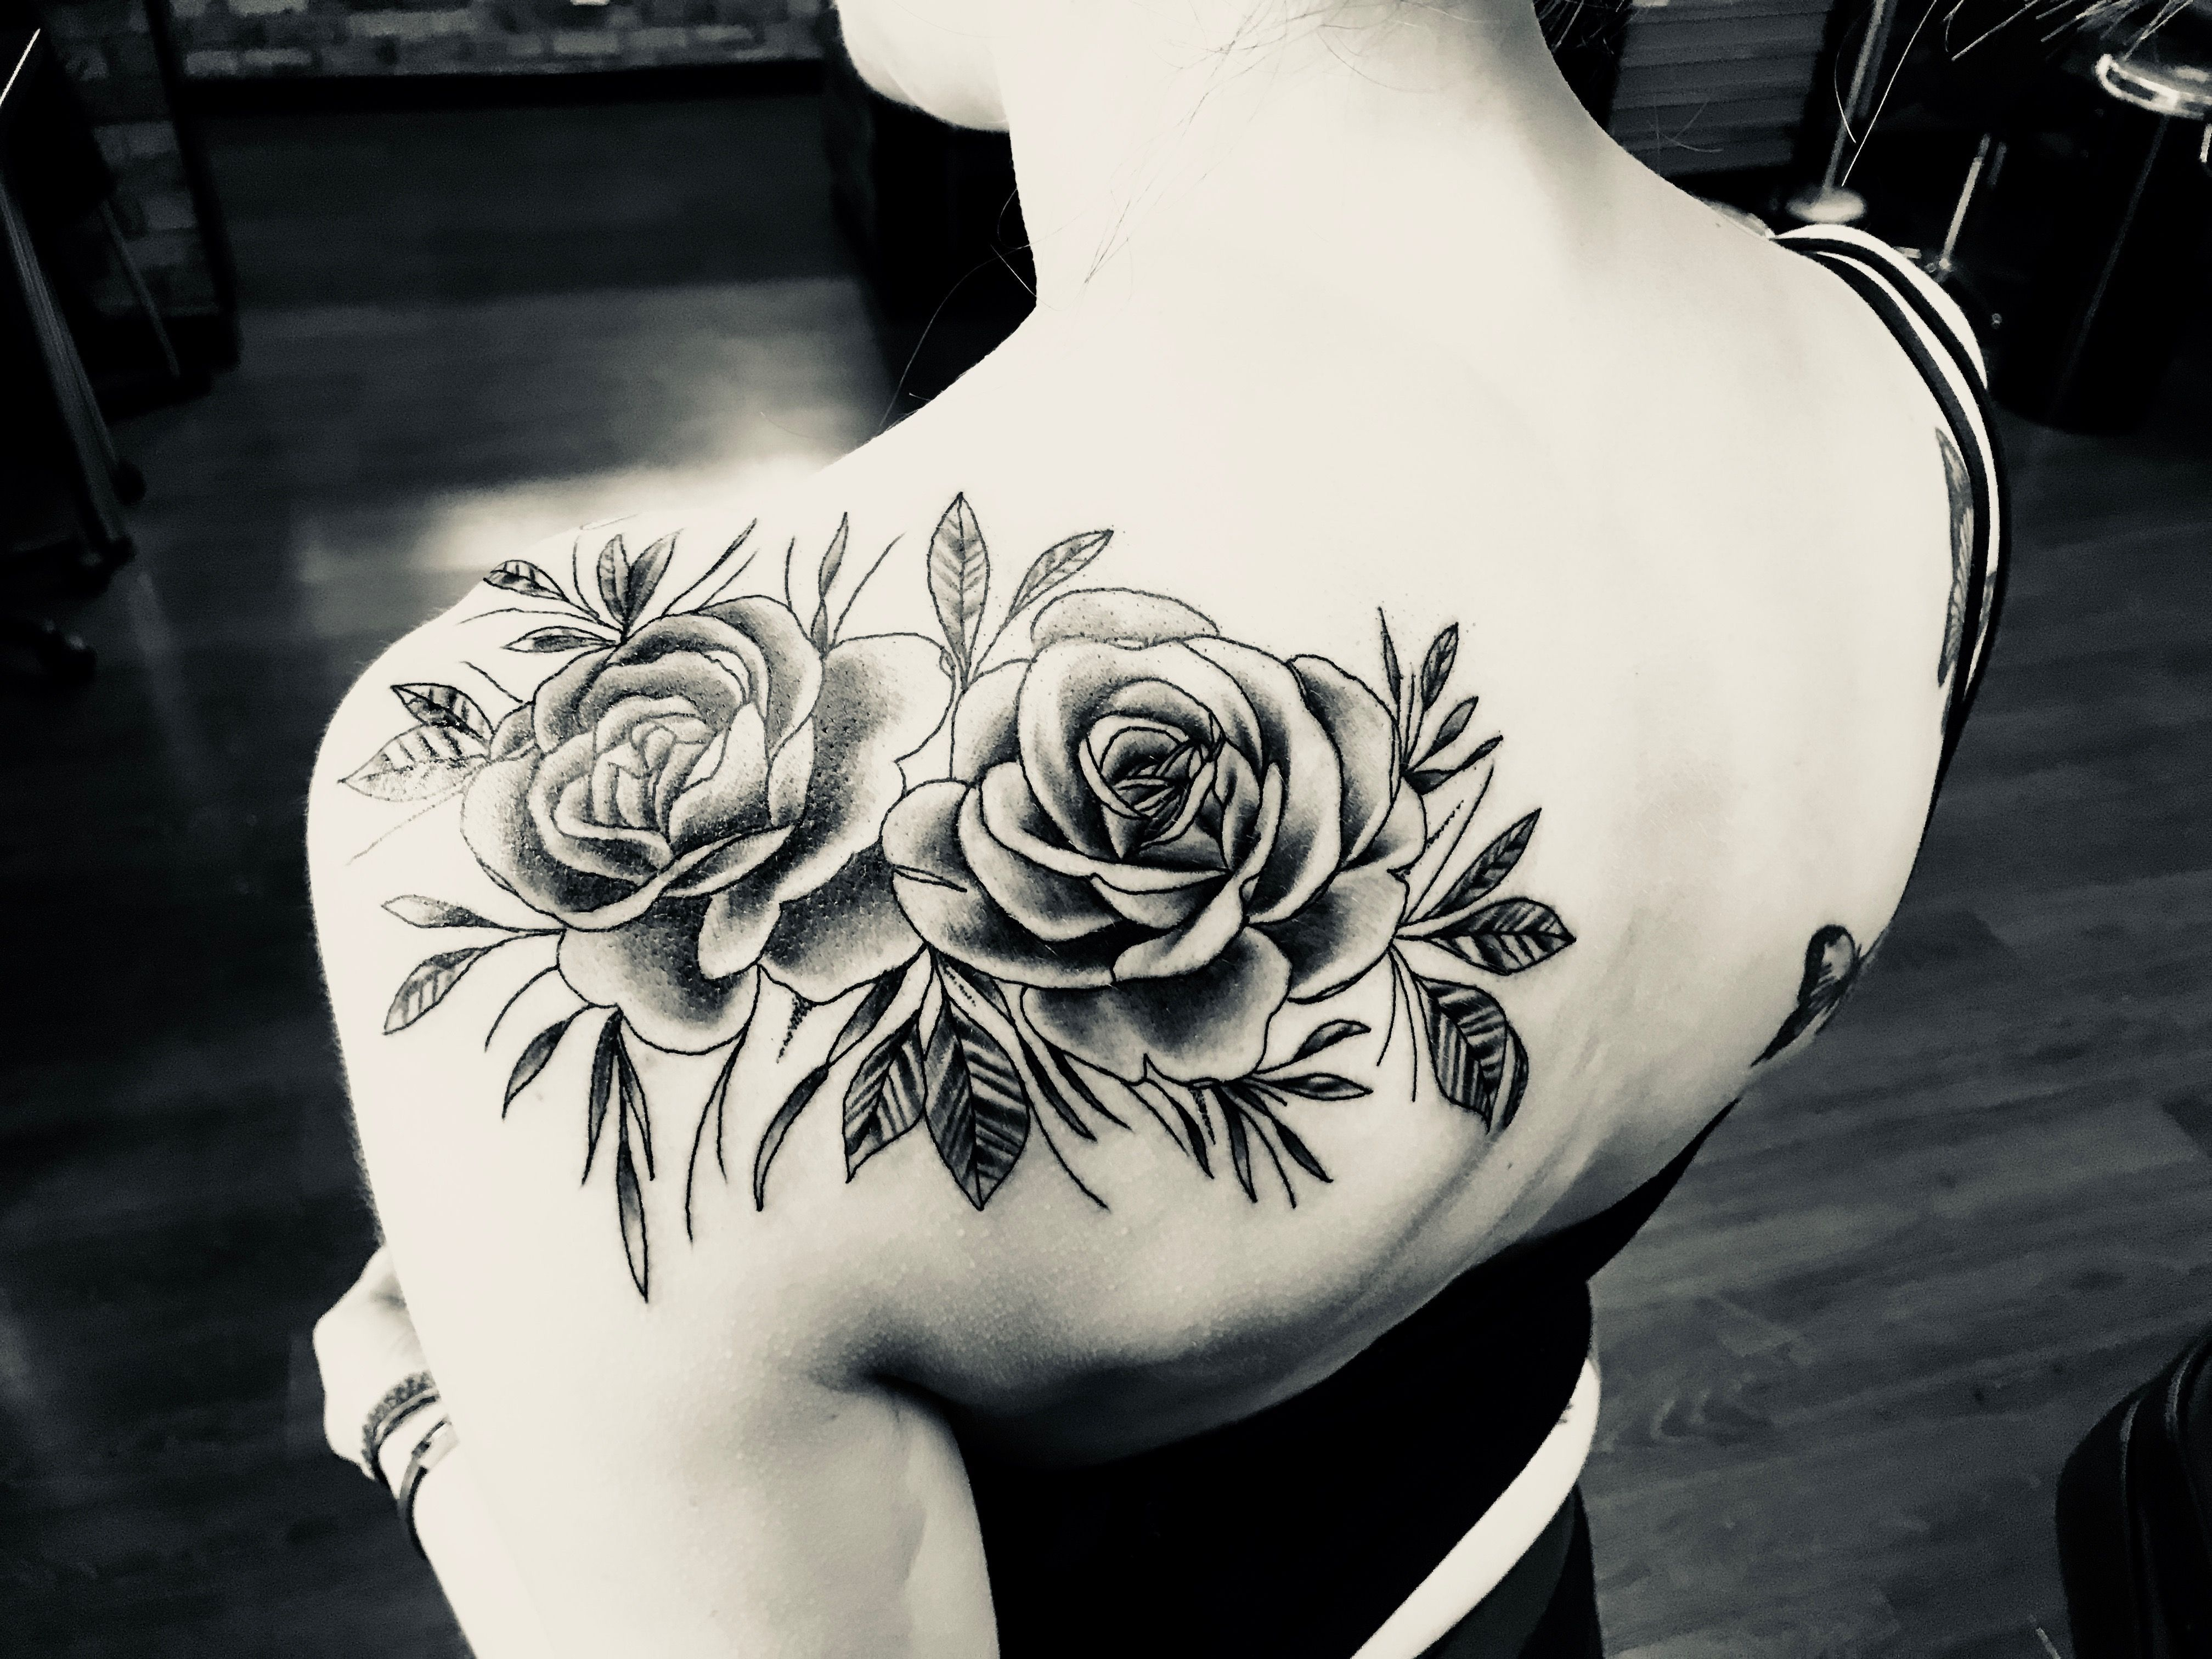 Rose Shoulder Tattoo In Black Shading Roseshouldertattoos pertaining to dimensions 4032 X 3024